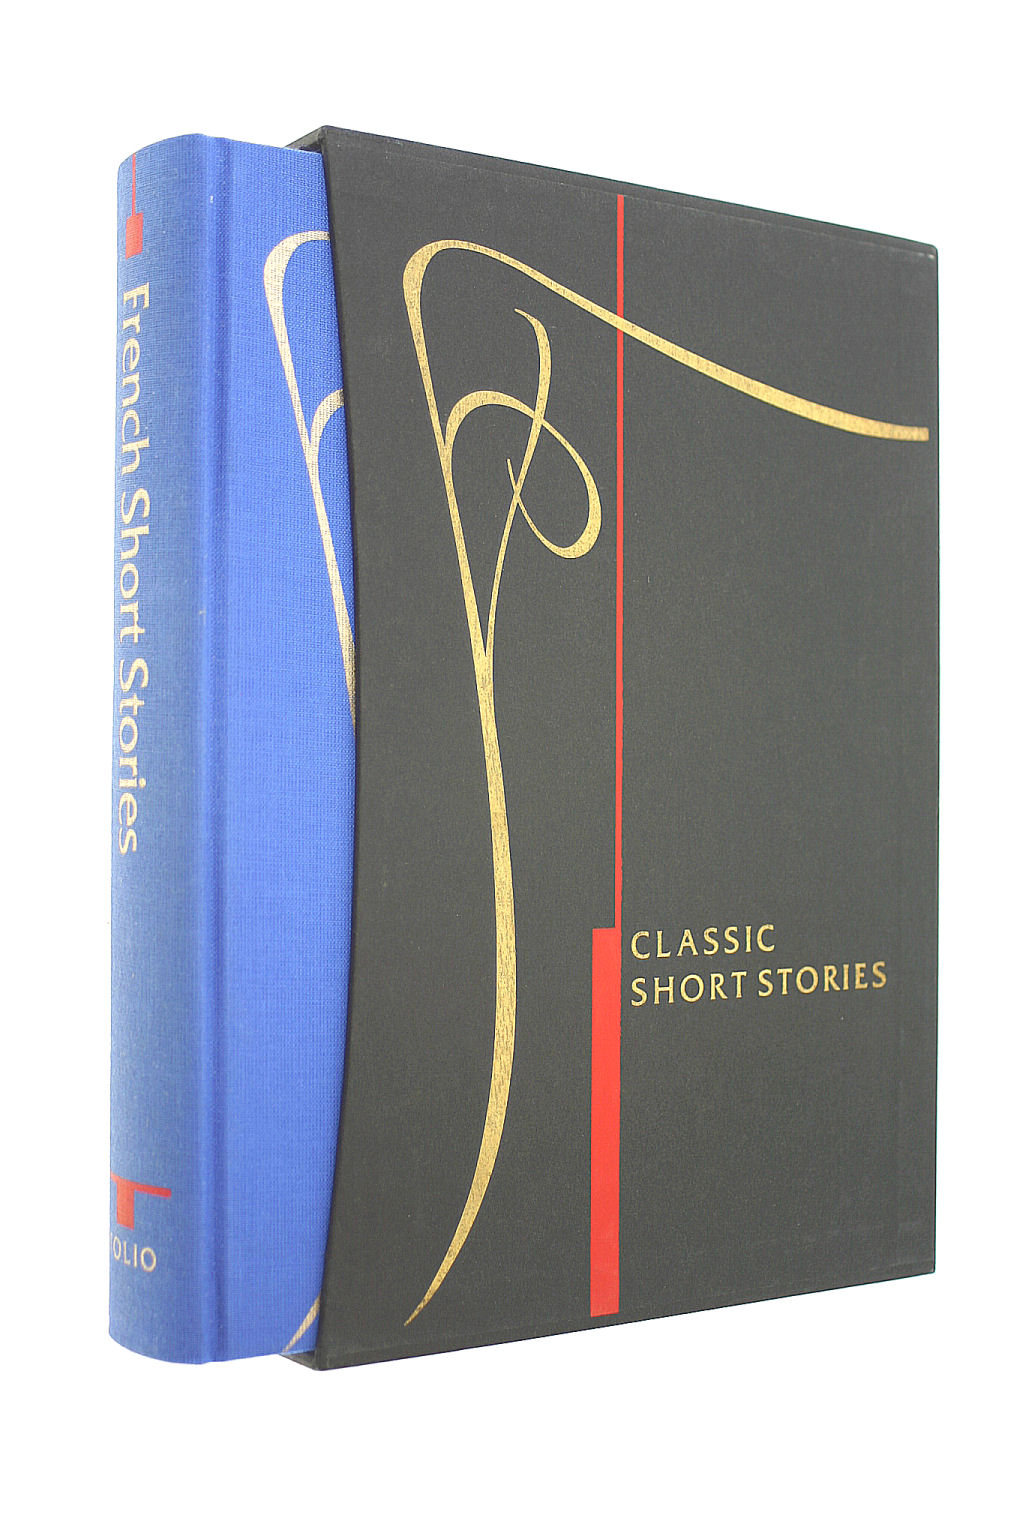 BRIAN MASTERS [INTRODUCTION]; VERONIQUE BOUR [ILLUSTRATOR]; - The Folio Society Book of French Short Stories